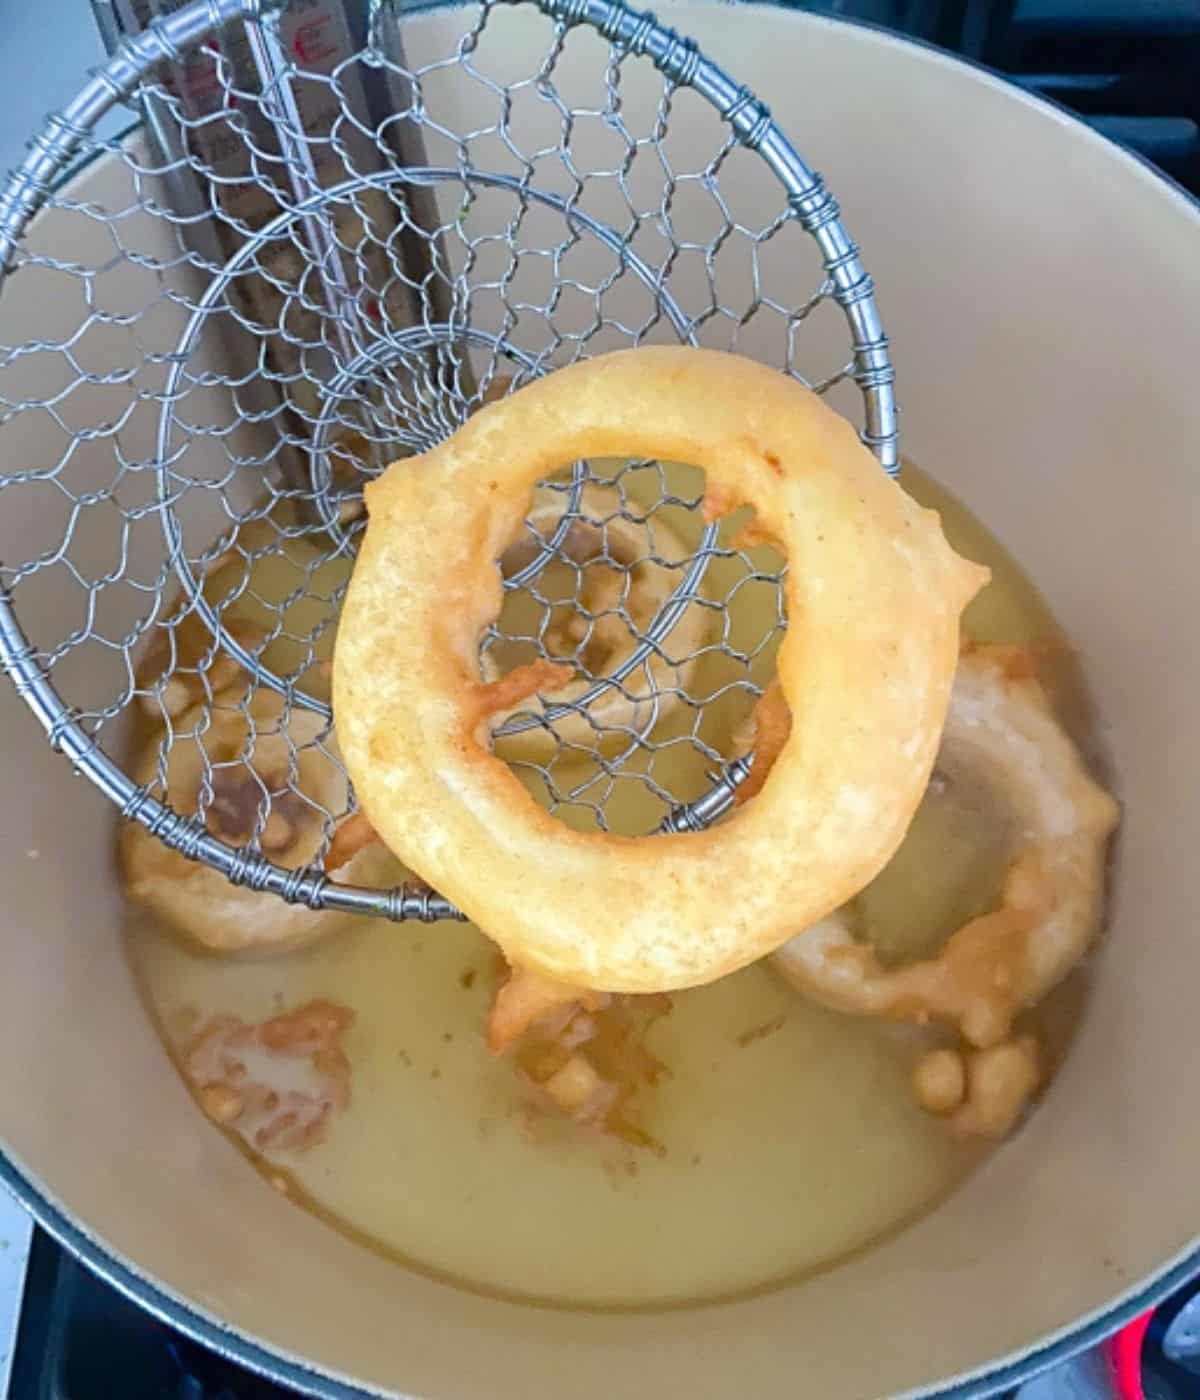 crispy beer battered onion ring coming out of the hot oil.